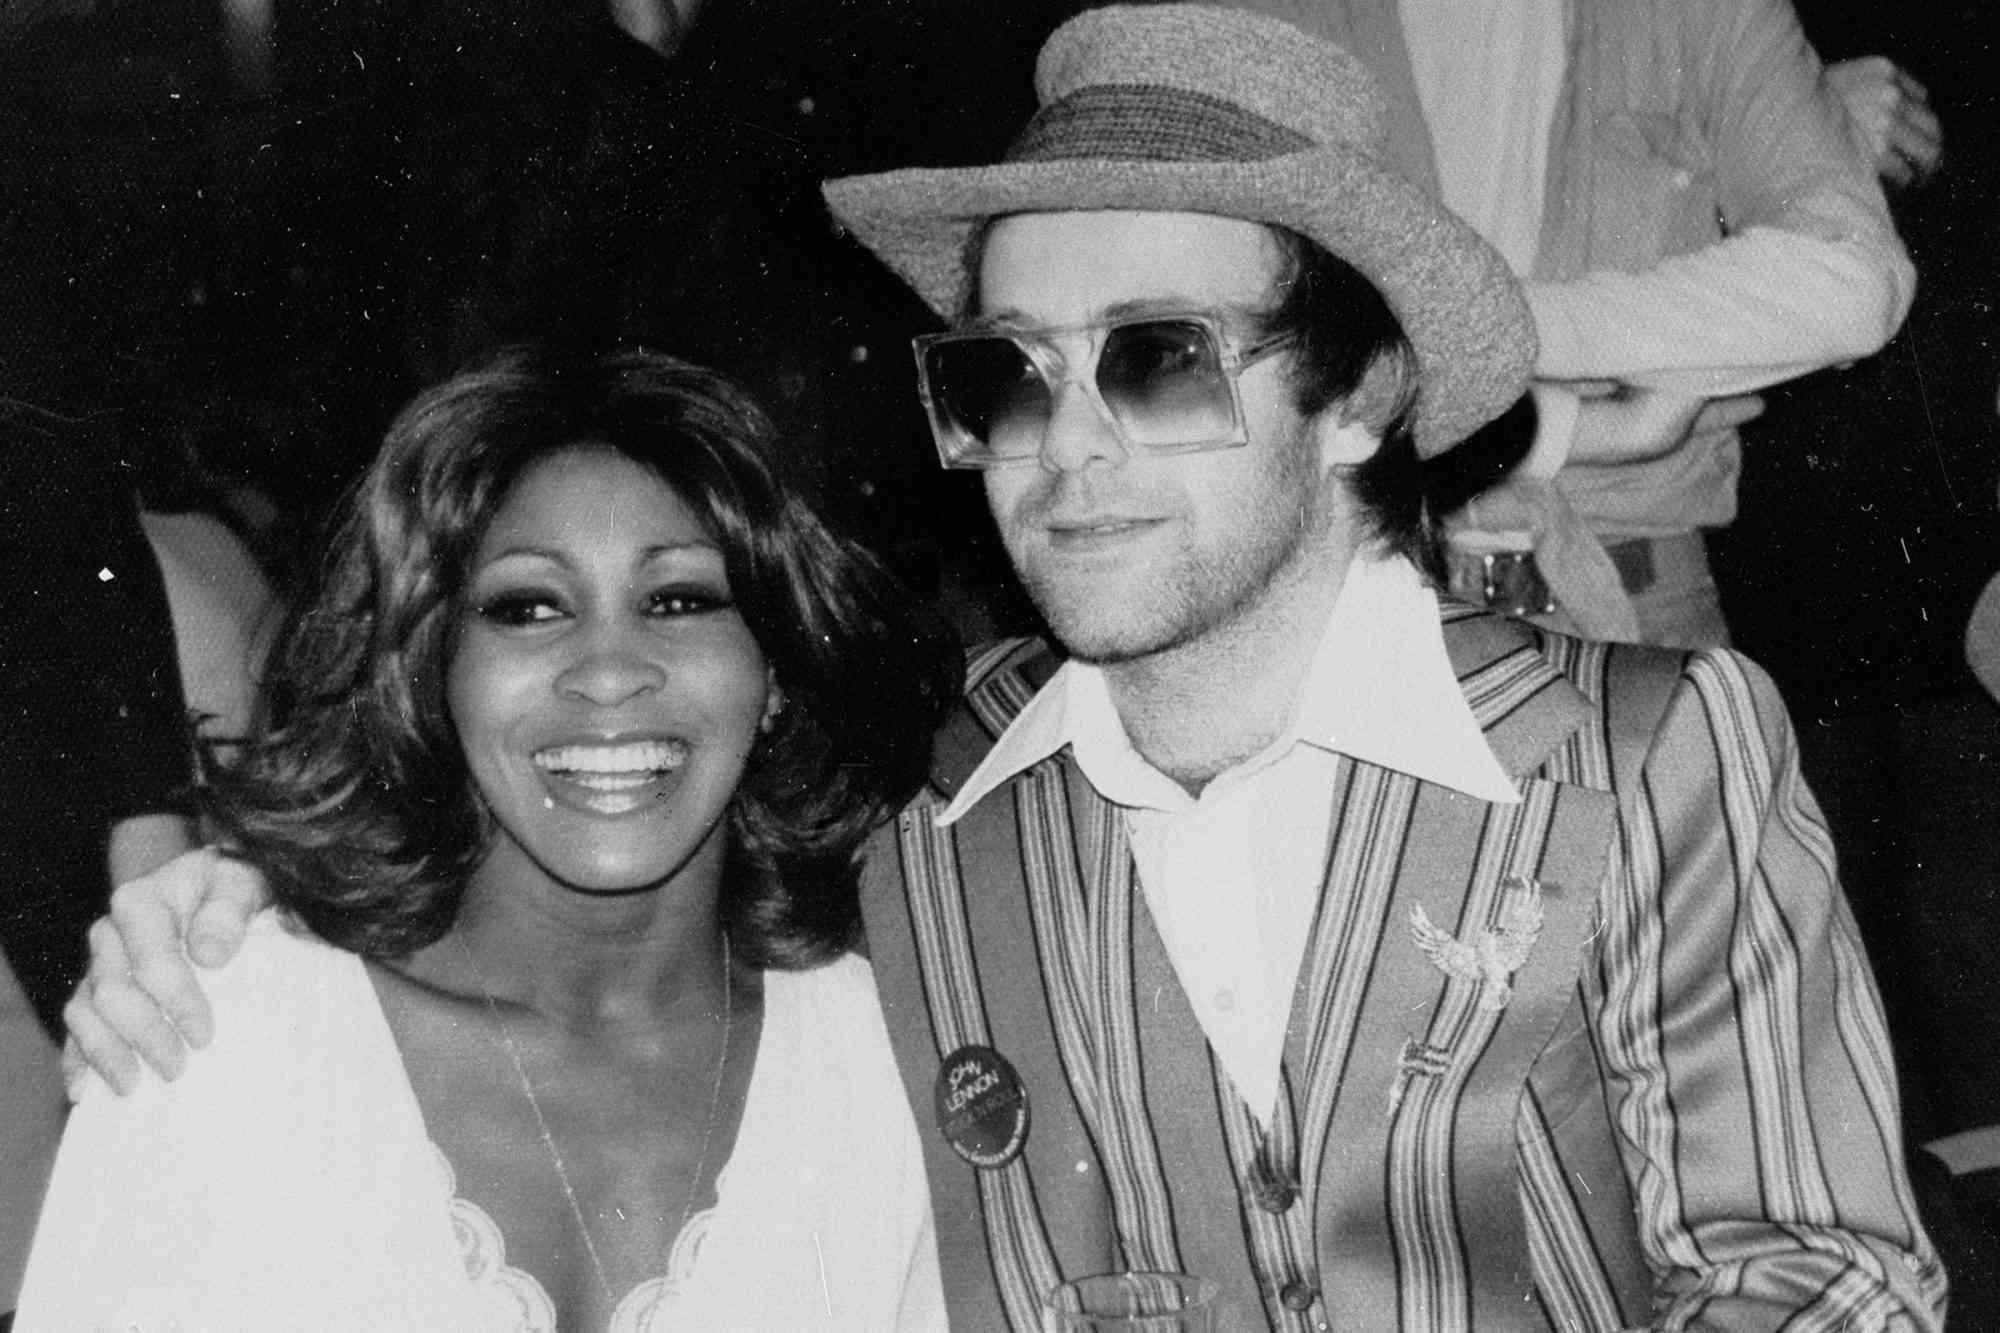 Tina Turner and Elton John at the "Tommy" movie press conference at the Plaza Hotel March 18, 1975 in New York City